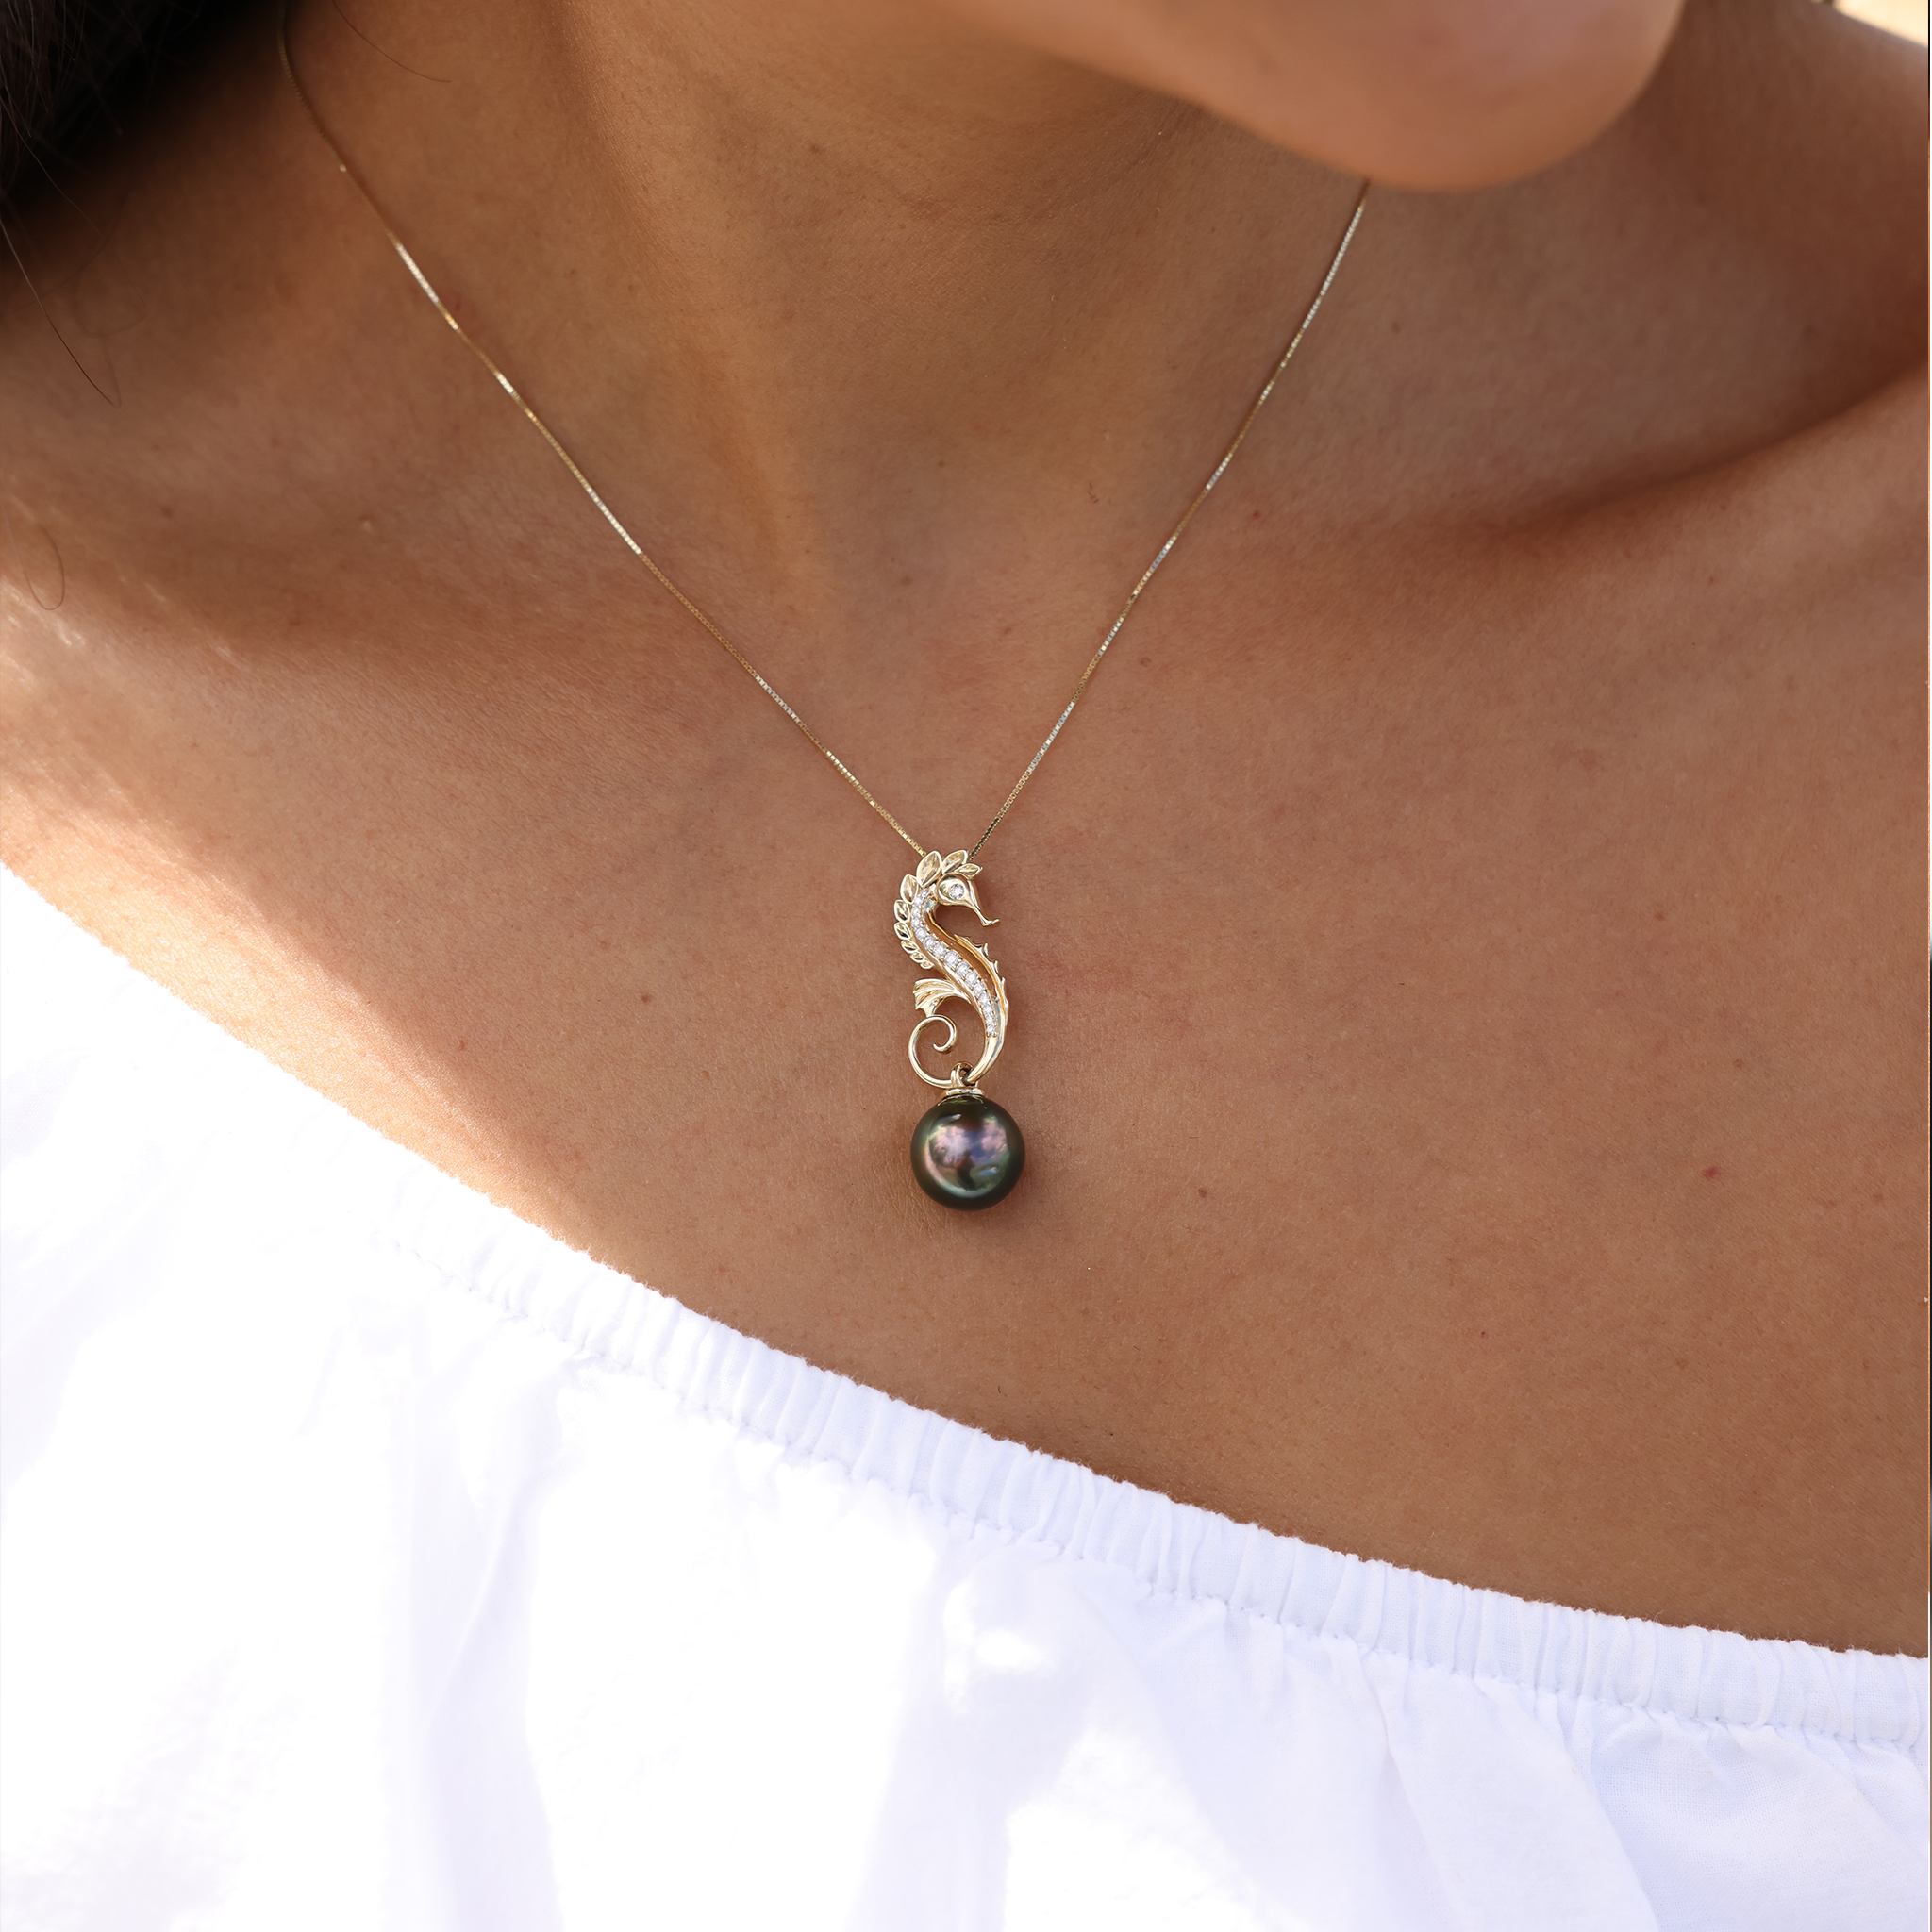 A womanʻs chest with an Ocean Dance Seahorse Tahitian Black Pearl Pendant in Gold with Diamonds - Maui Divers Jewelry